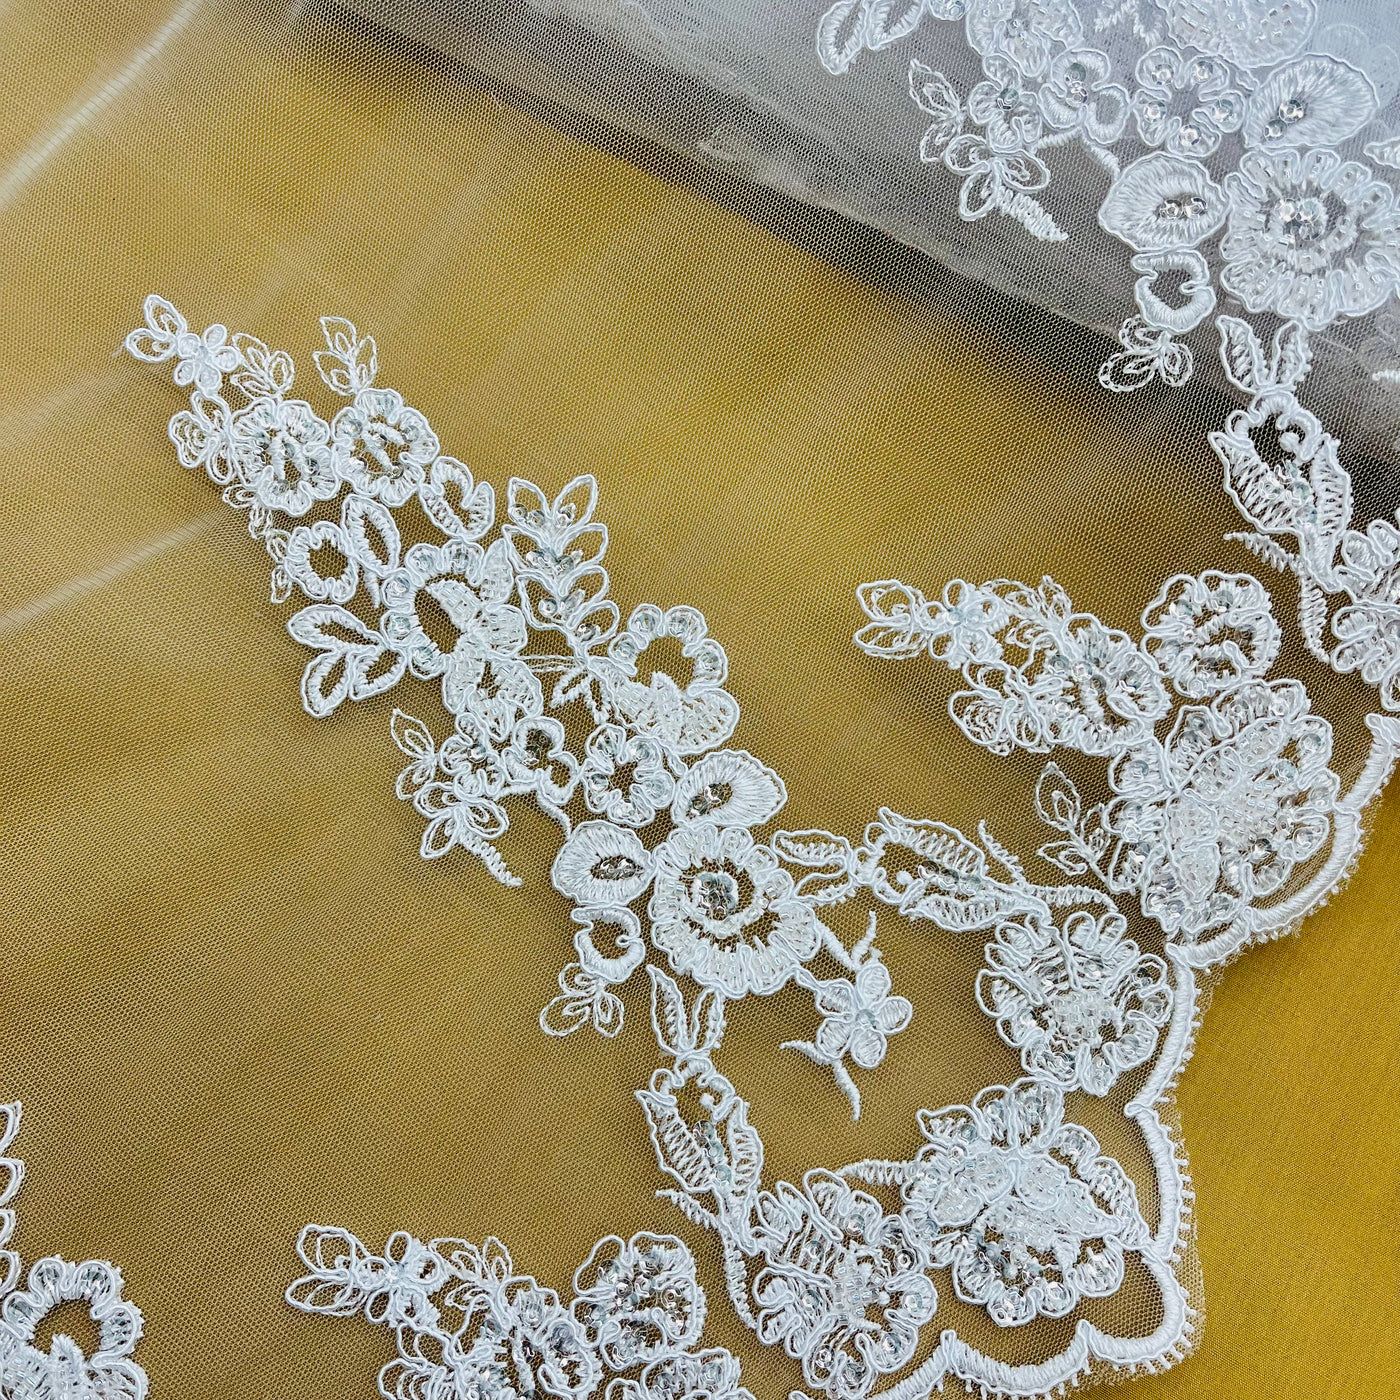 Beaded & Corded Bridal Lace Fabric Embroidered on 100% Polyester Net Mesh | Lace USA